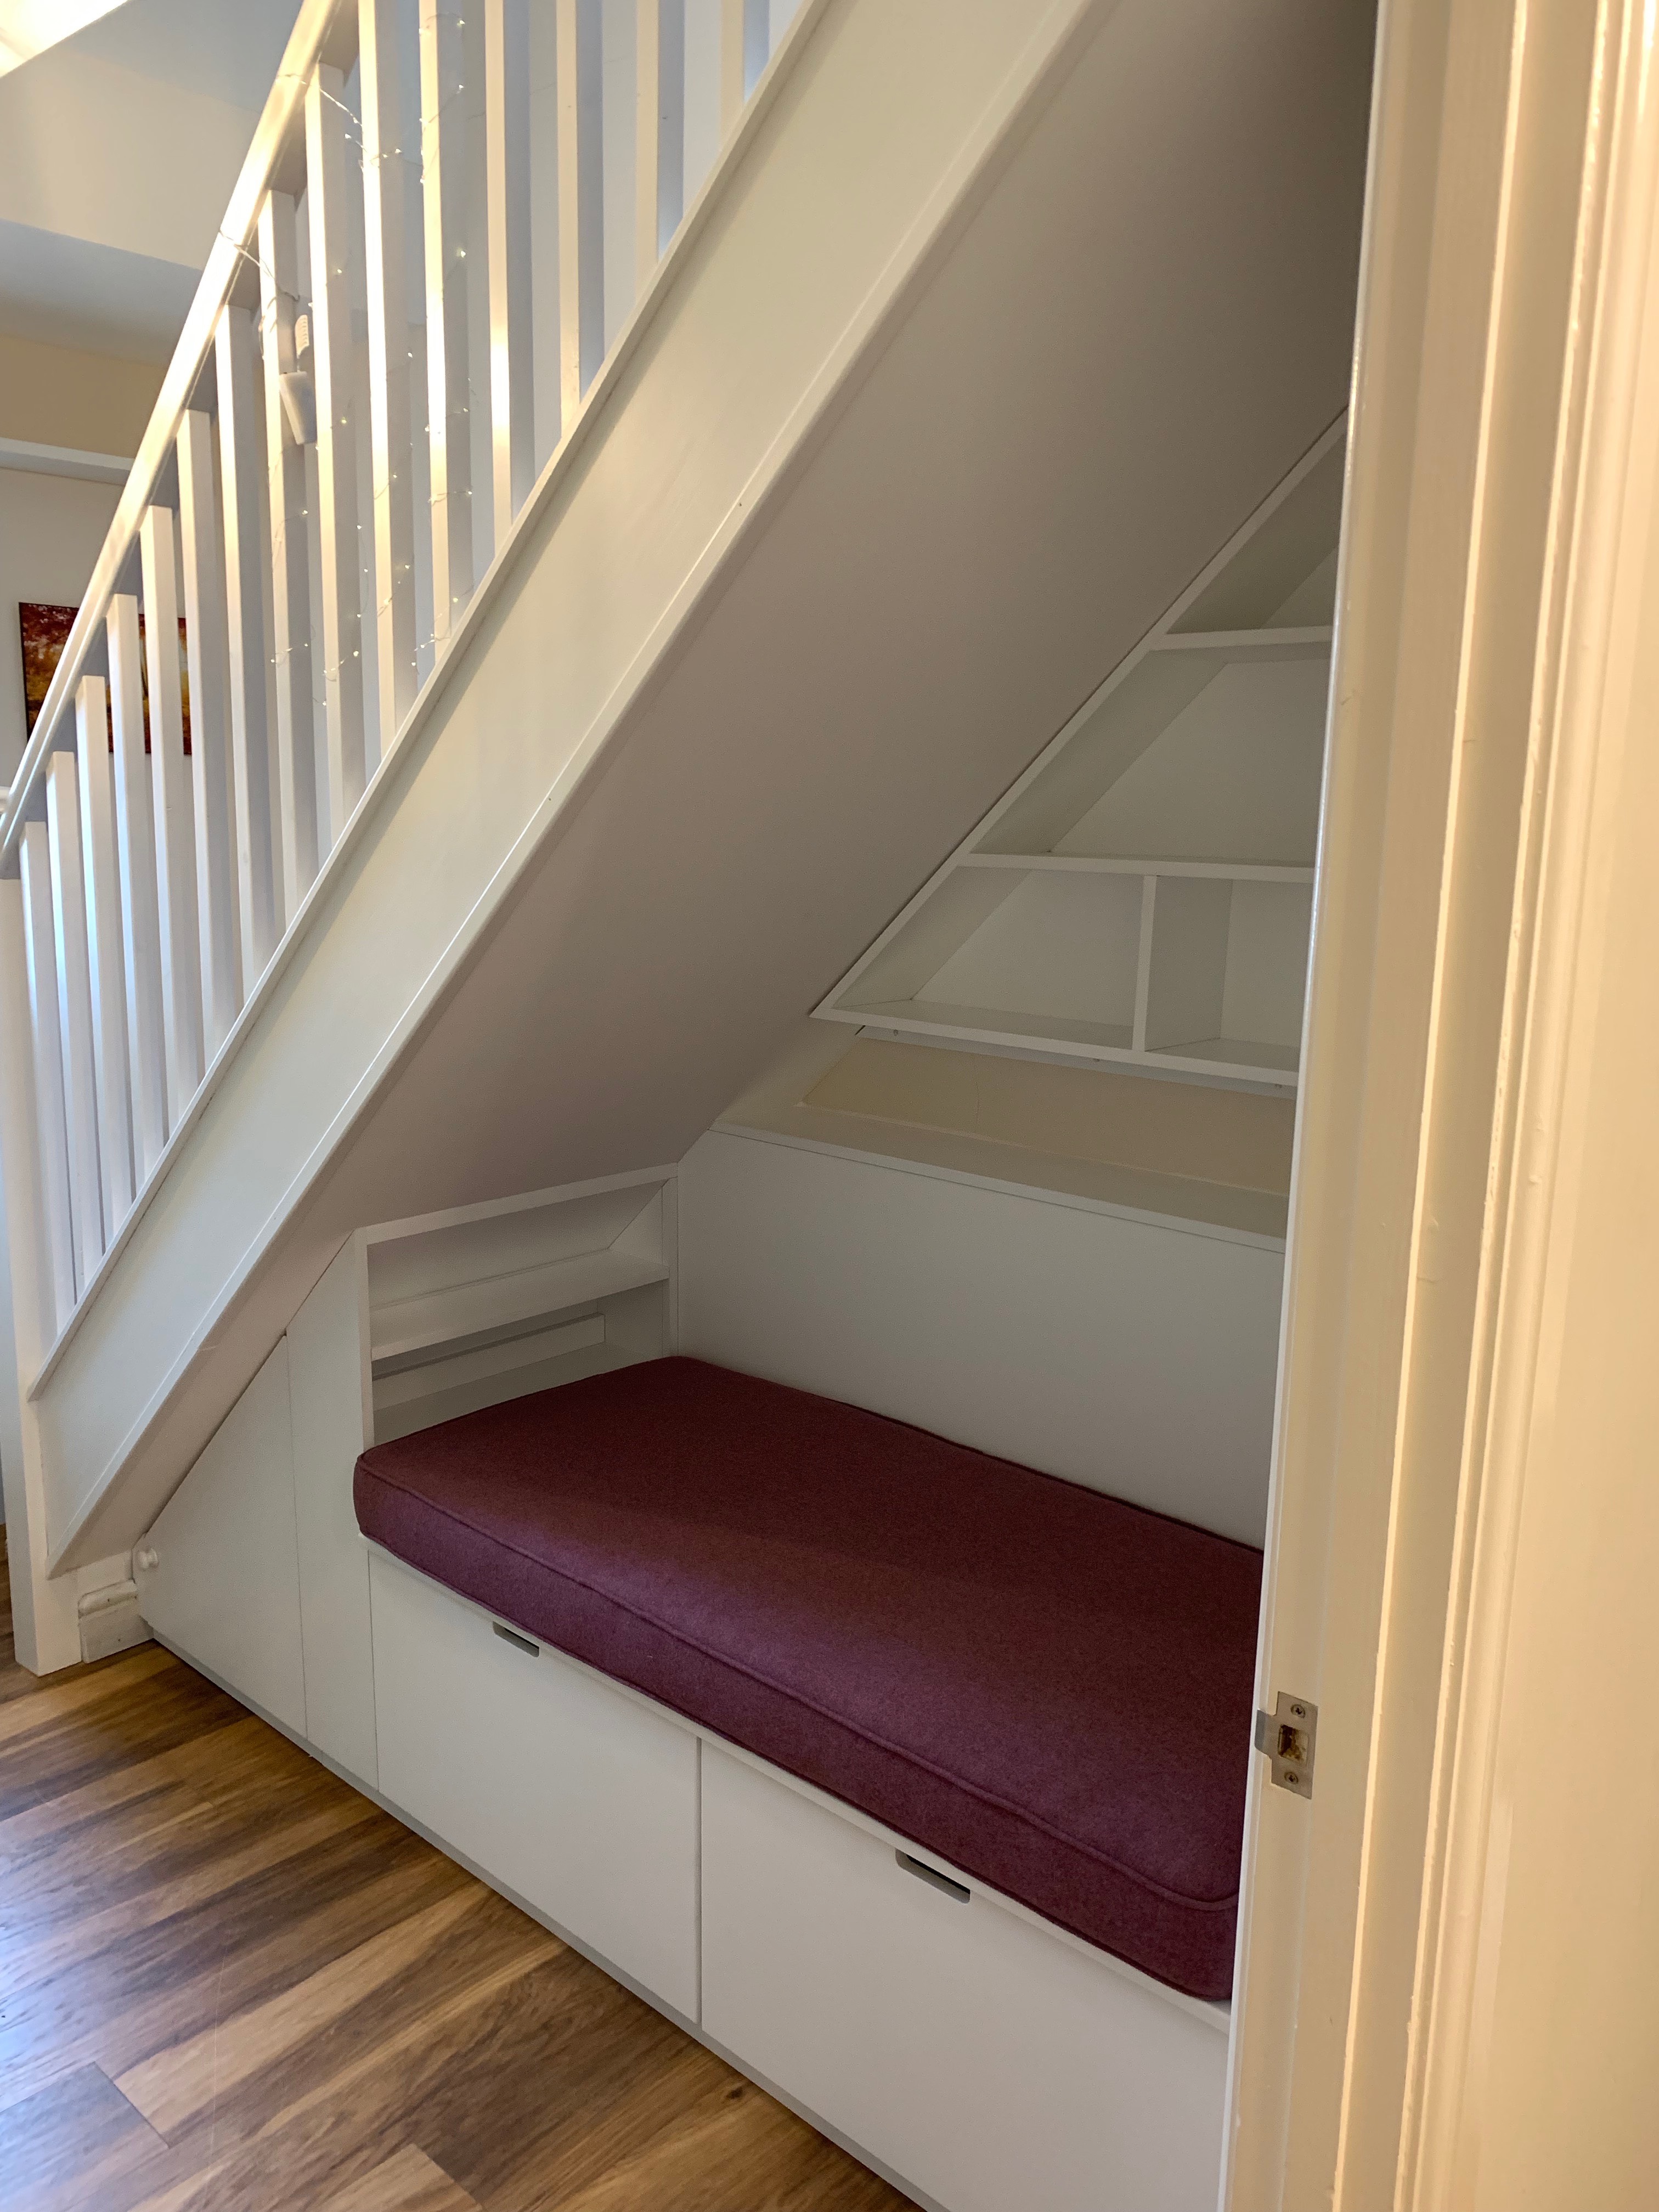 Under stairs seating and storage